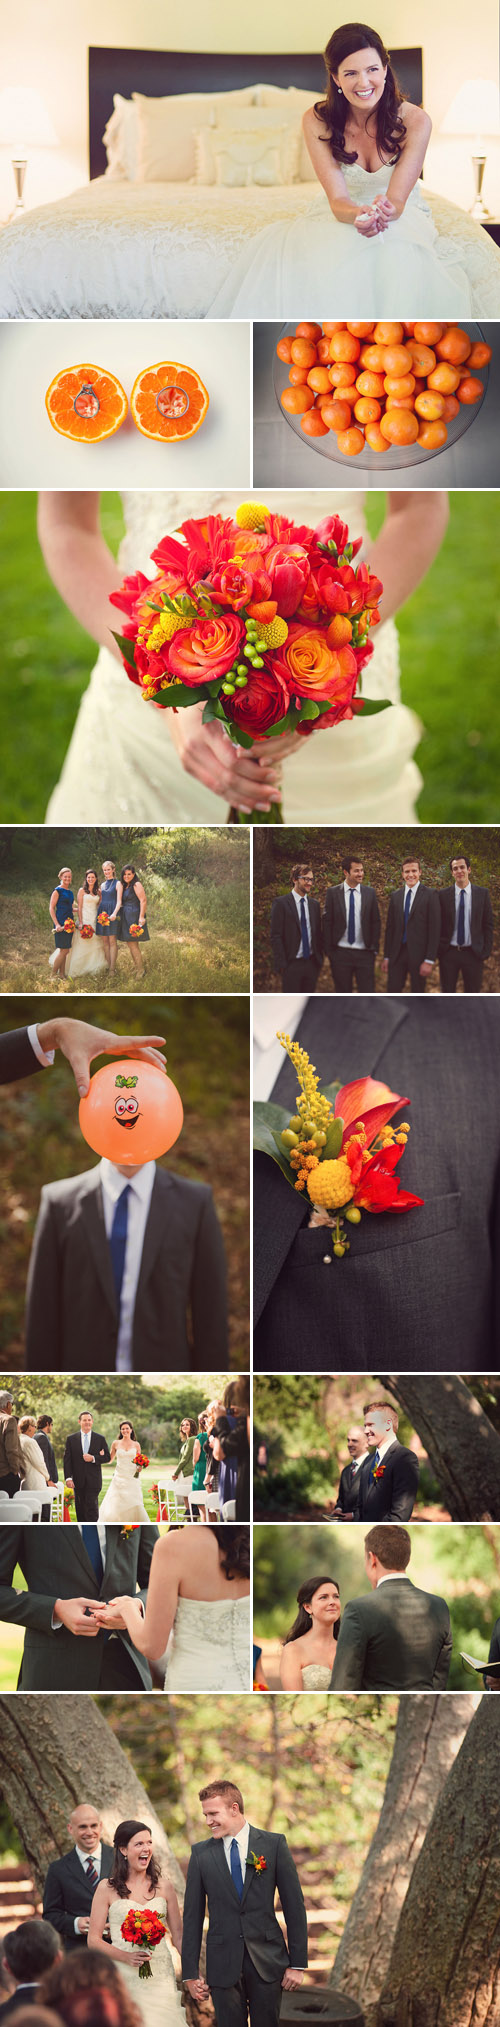 colorful southern California wedding at Temescal Gateway Park, Pacific Palisades, photography by Michael Chan of The Image Is Found